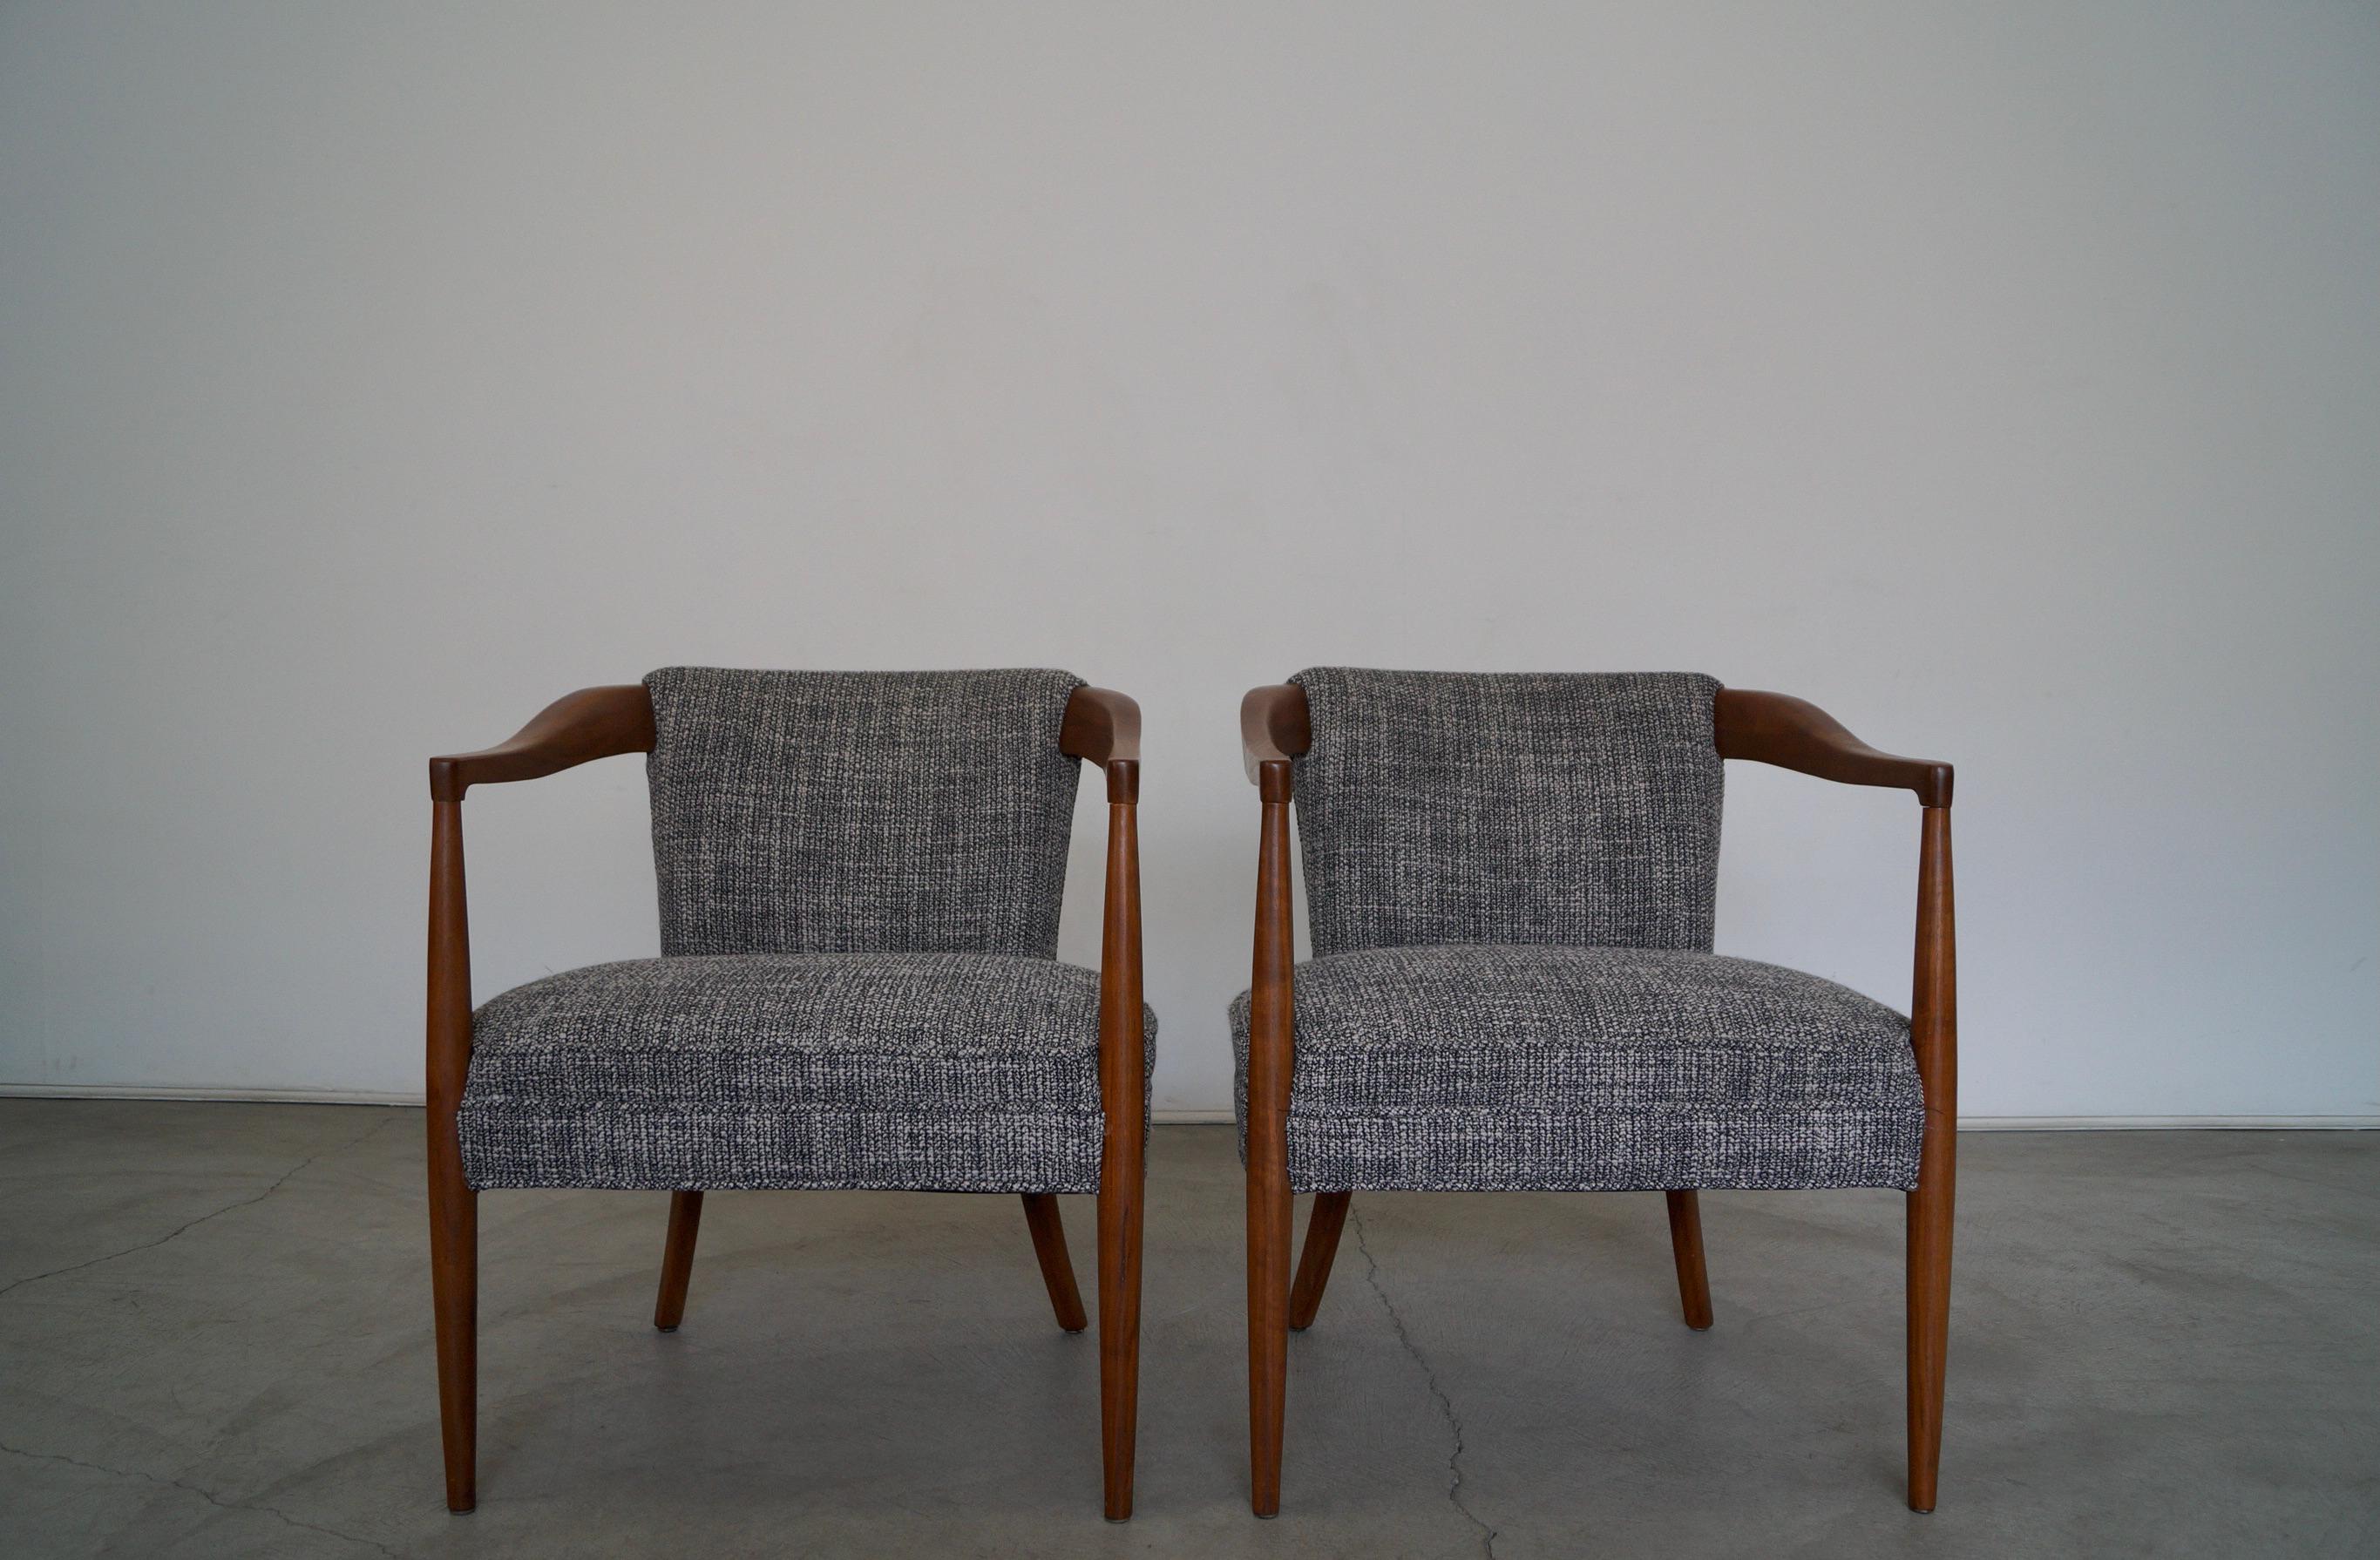 Pair of Mid-Century Modern armchairs for sale. From the 1950's, and have been professionally restored. They have been refinished and reupholstered in new fabric and foam. The frames are made of solid walnut, and have been refinished in natural